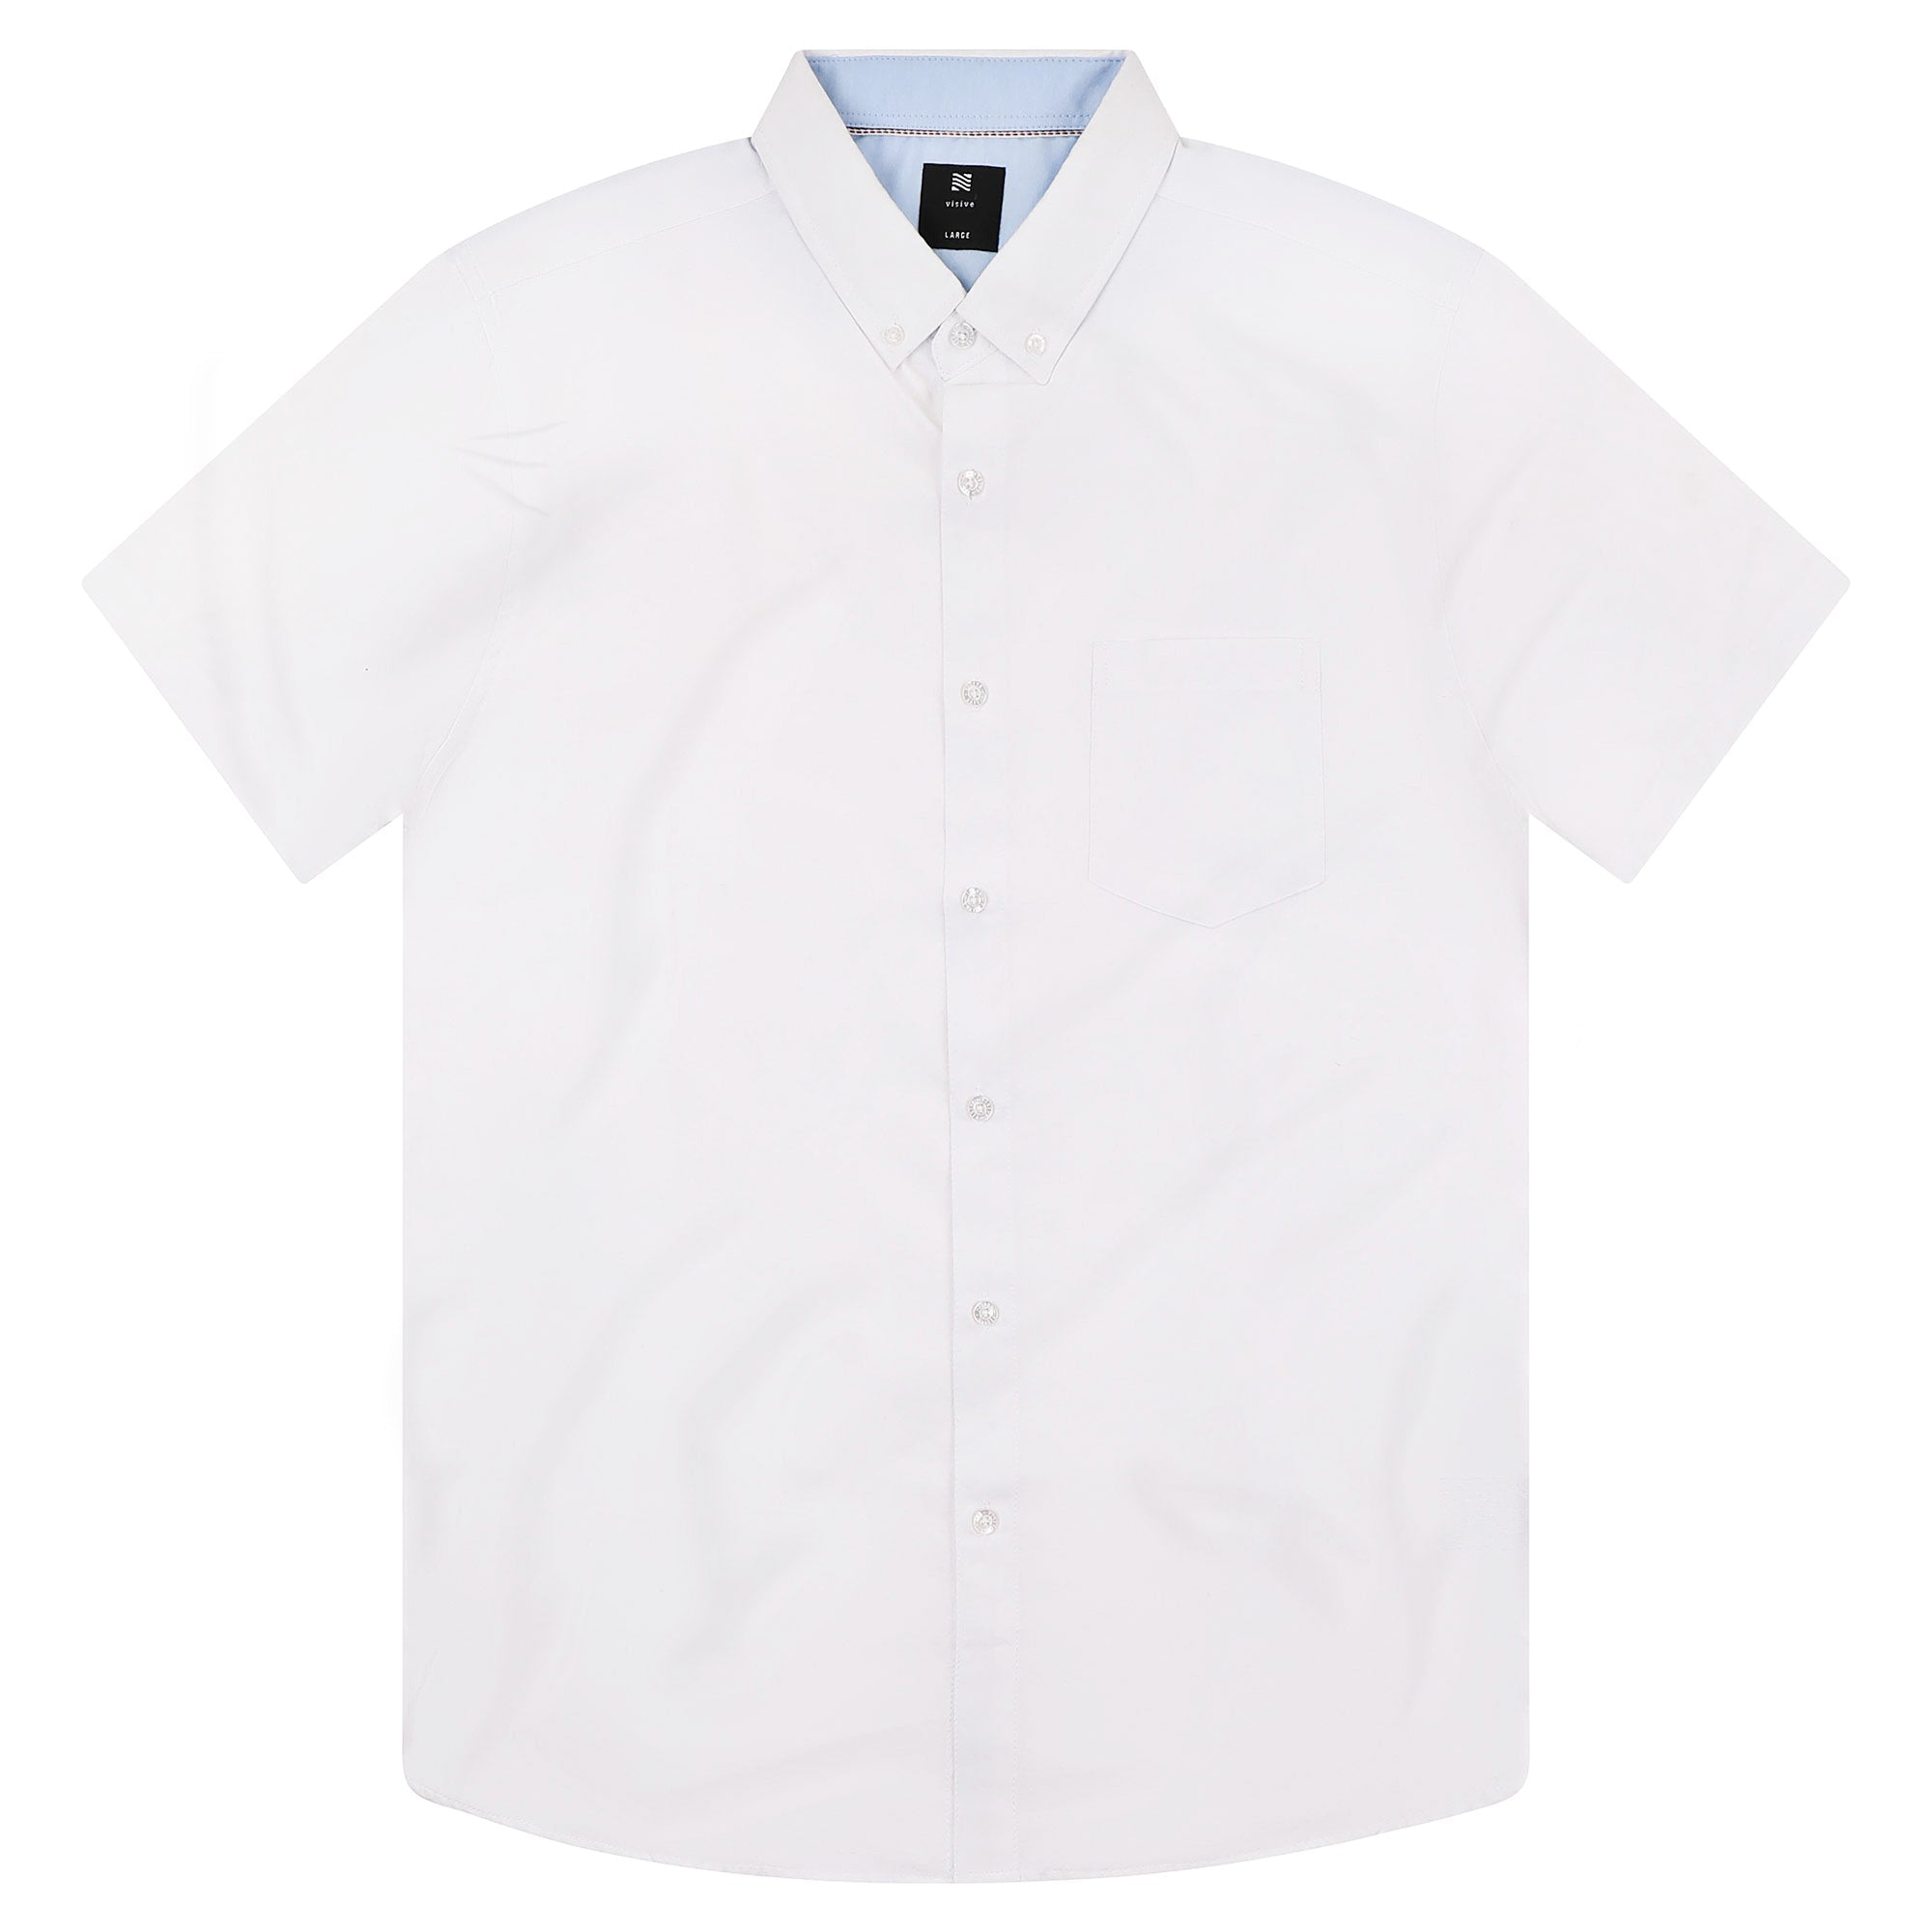 Solid Oxford - White